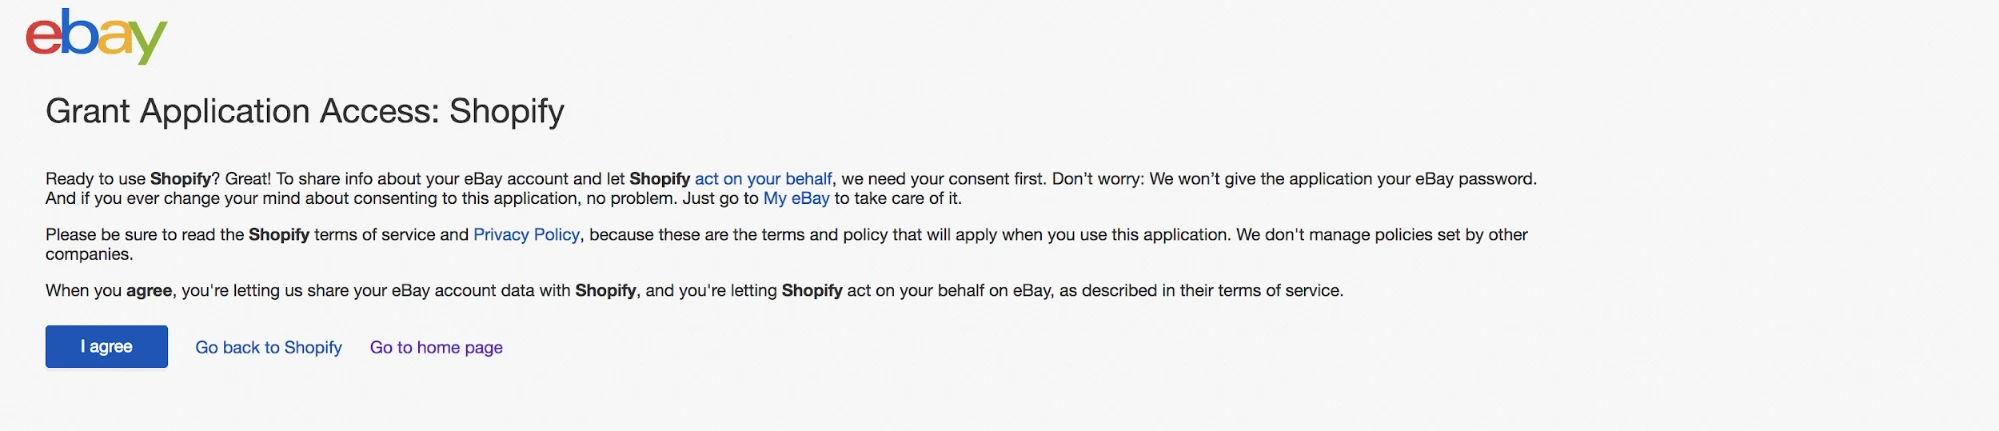 to grant Shopify access to your eBay account - Shopify eBay integration